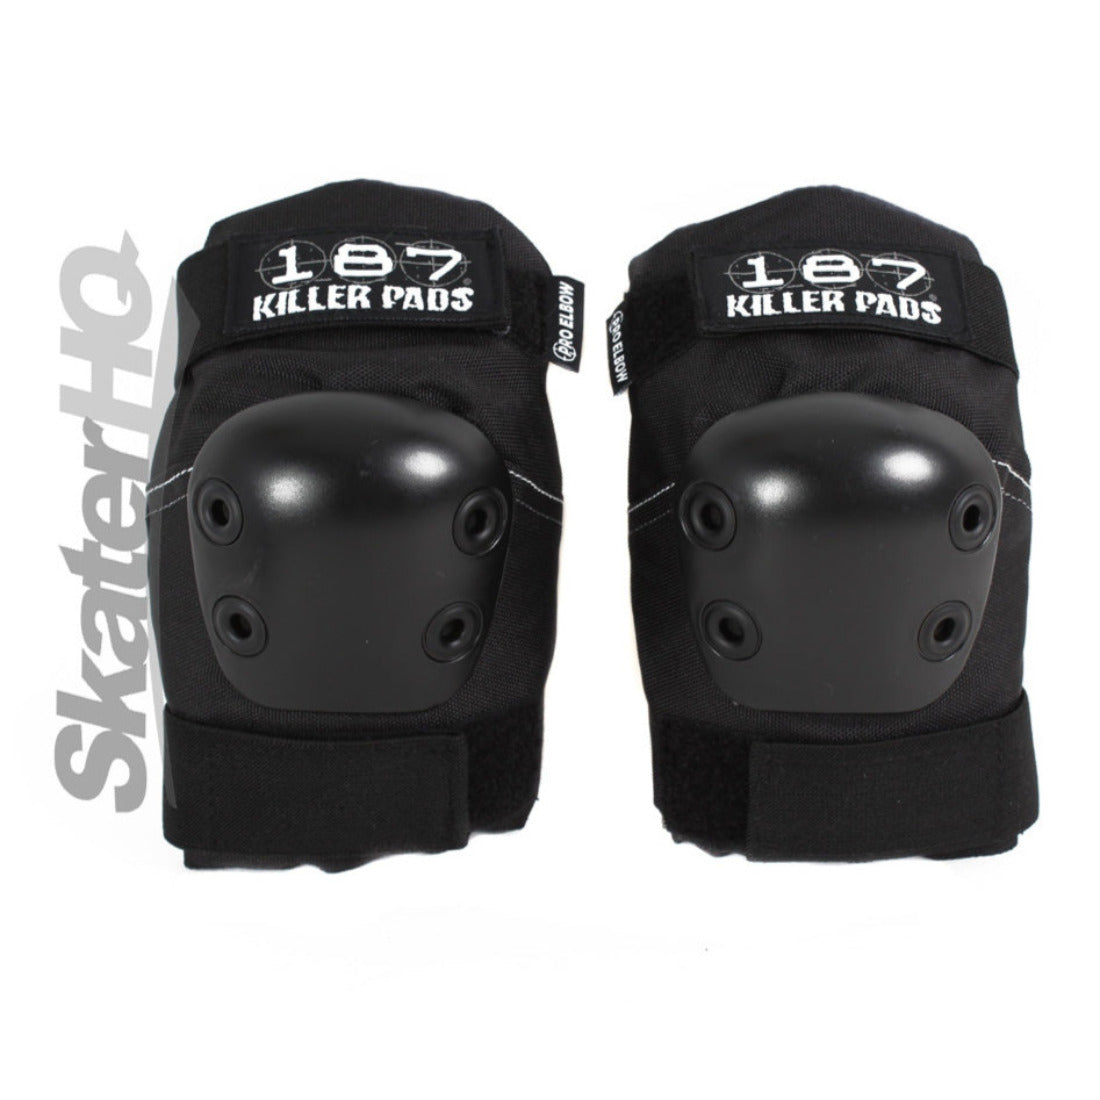 187 Pro Elbow Pads - Black Protective Gear